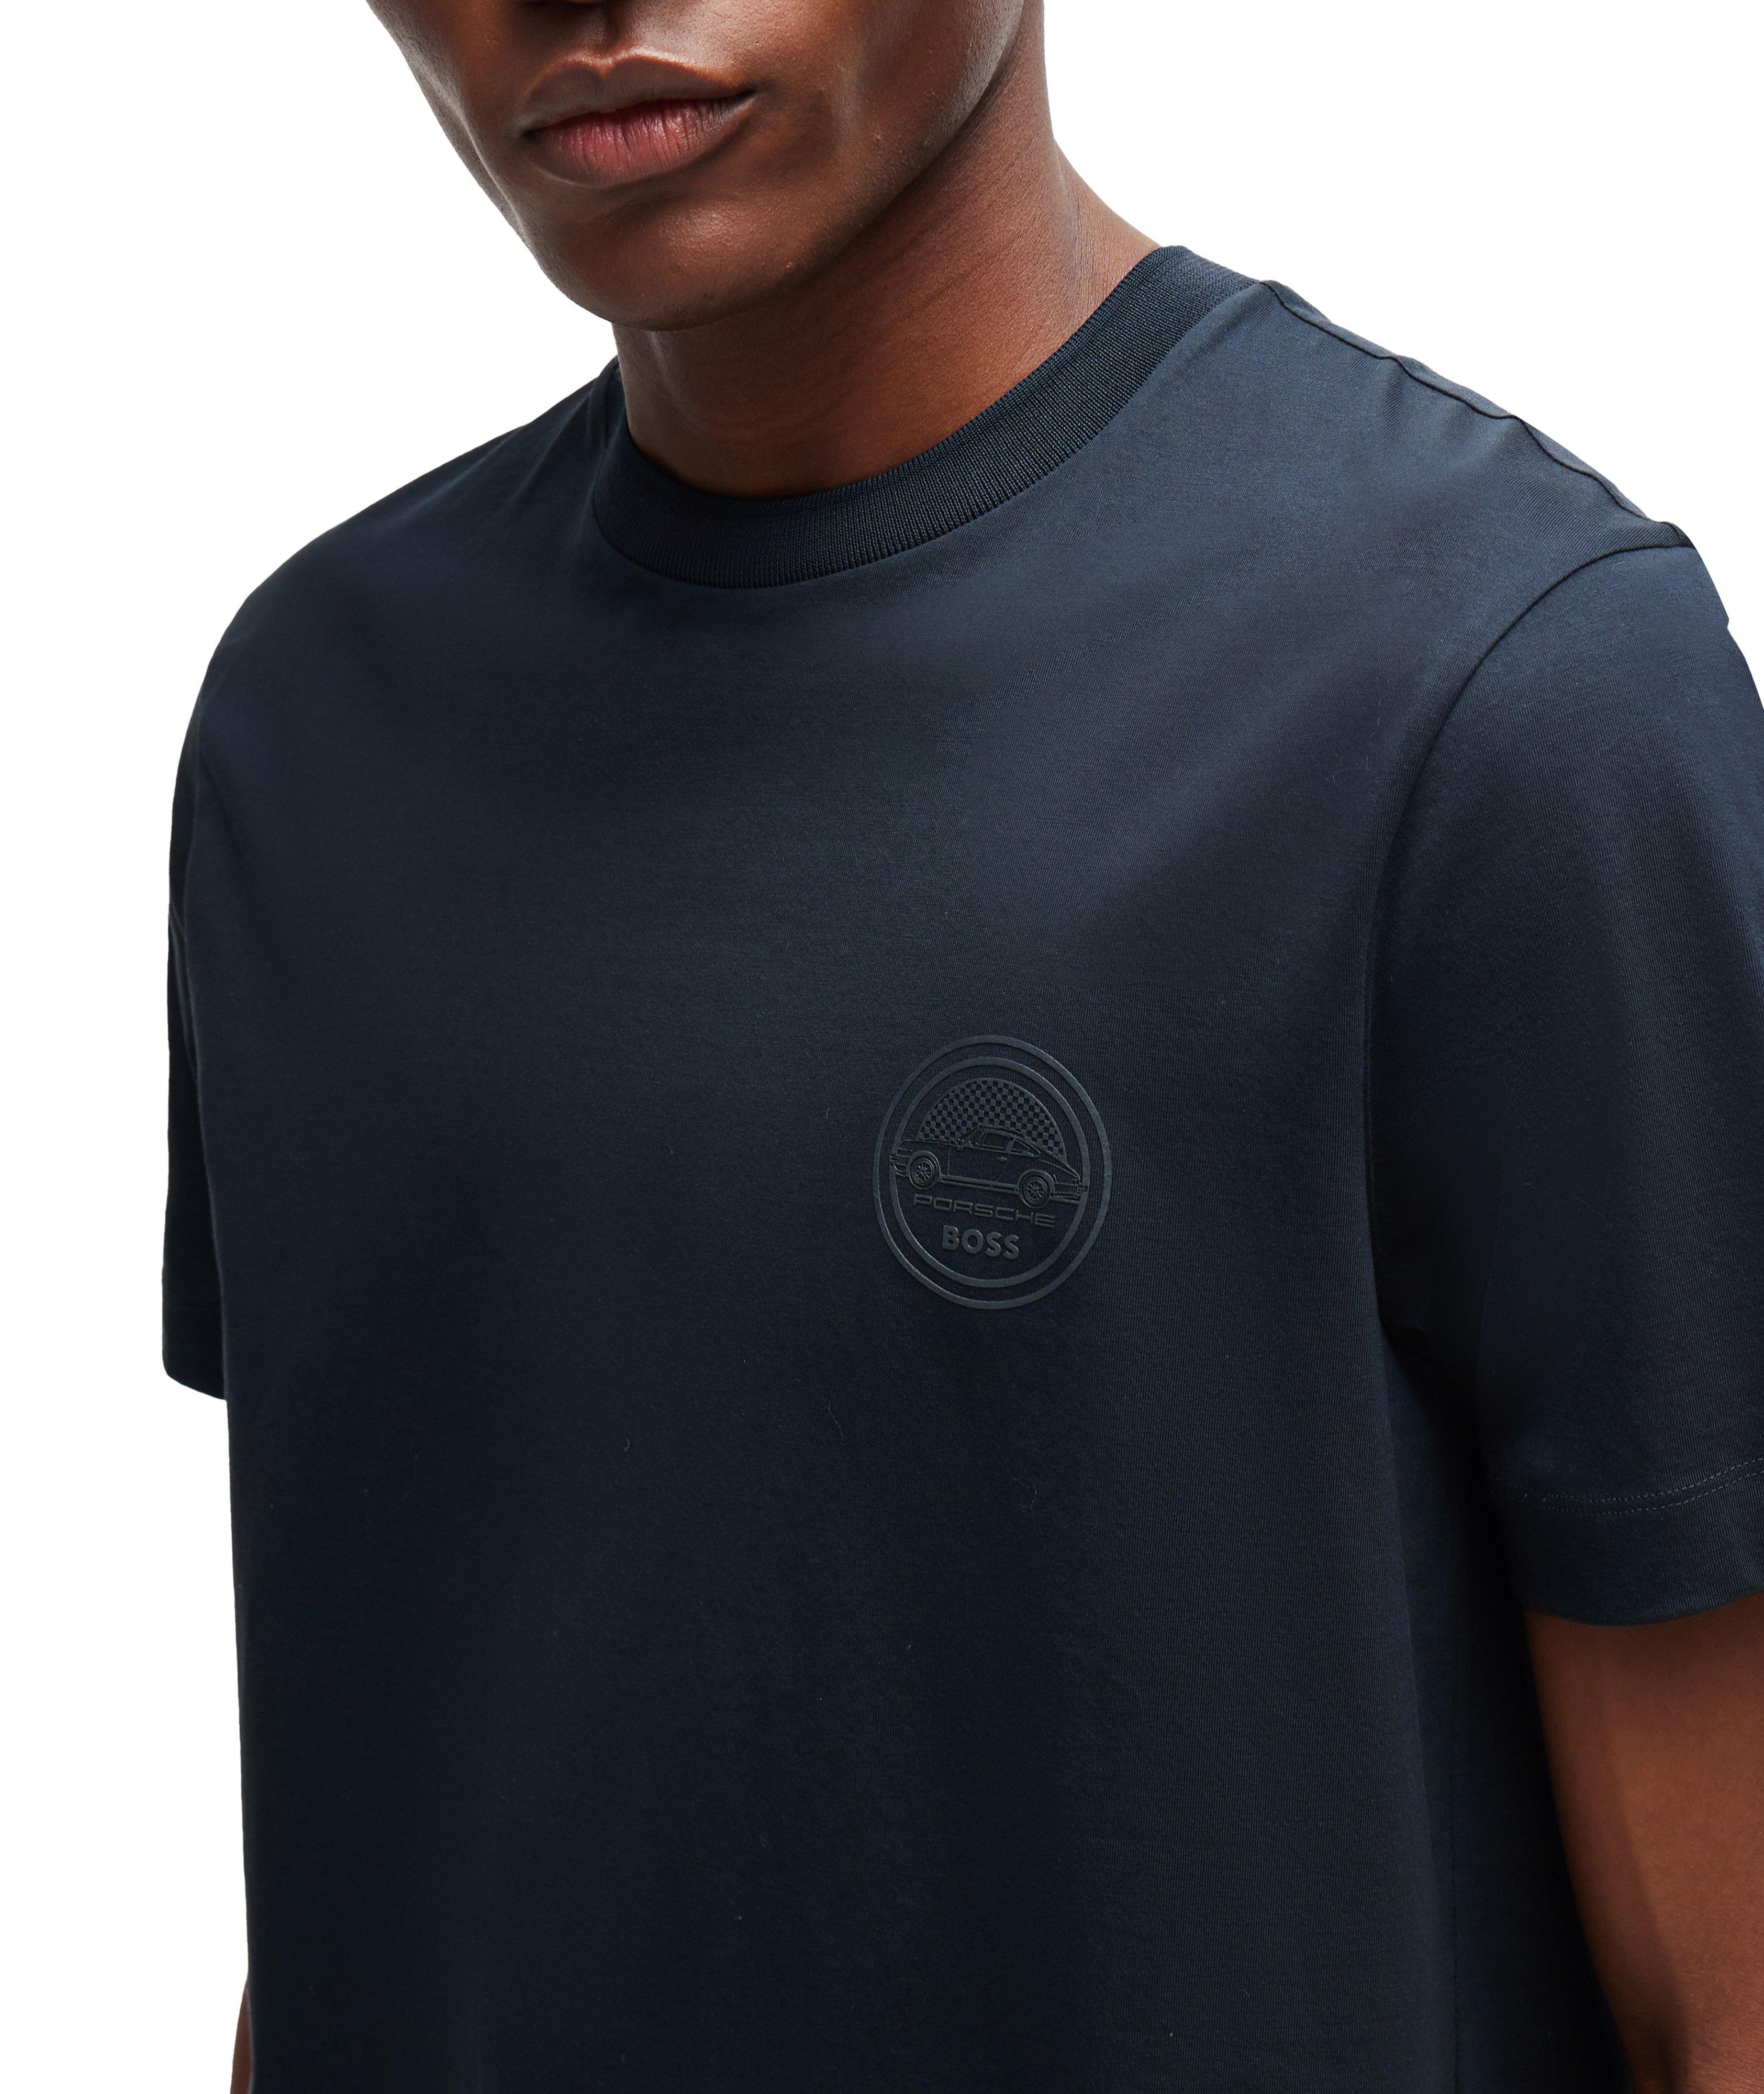 Porsche Collection Embroidered Patch Mercerized Cotton T-Shirt image 3